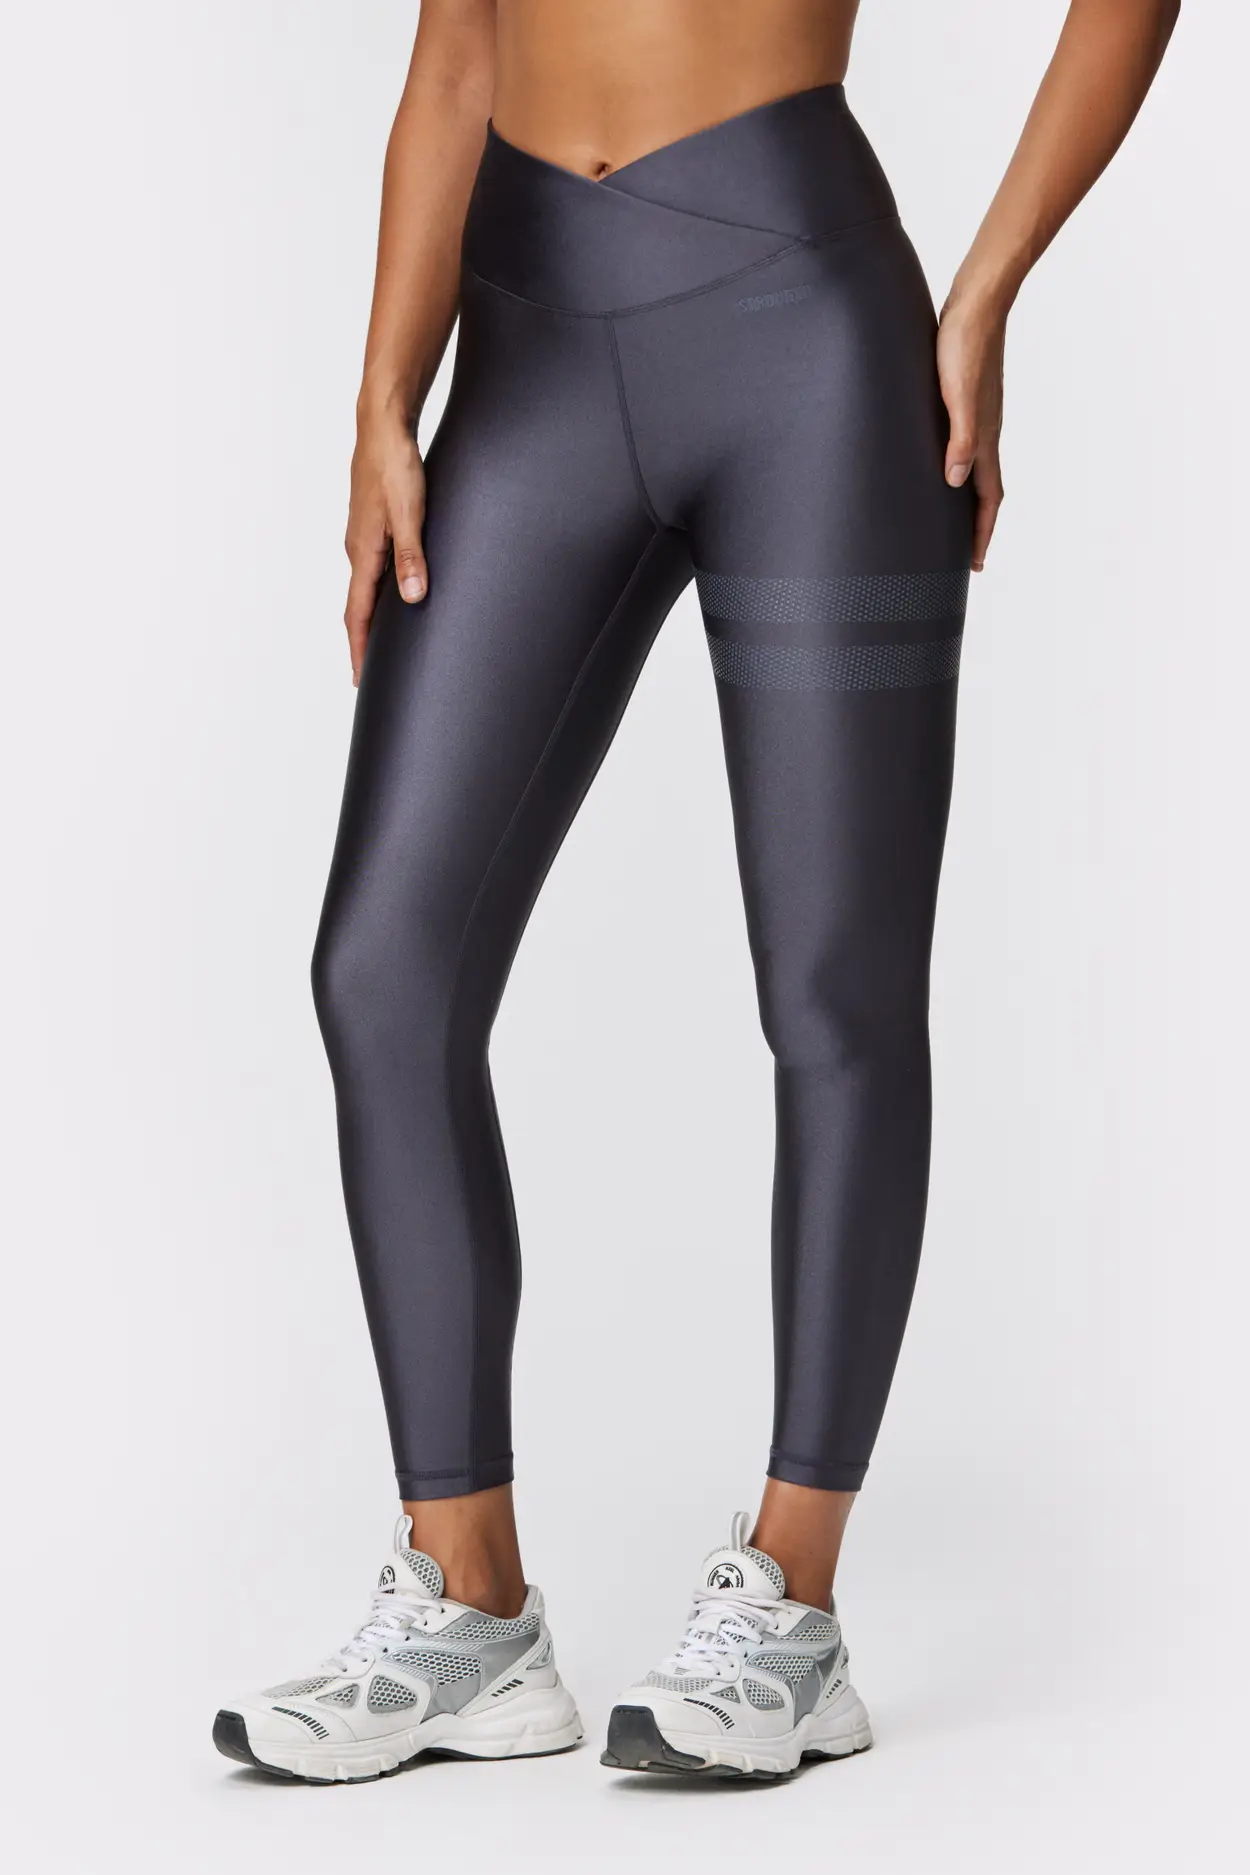 based on basics One Size Tights Anthracite